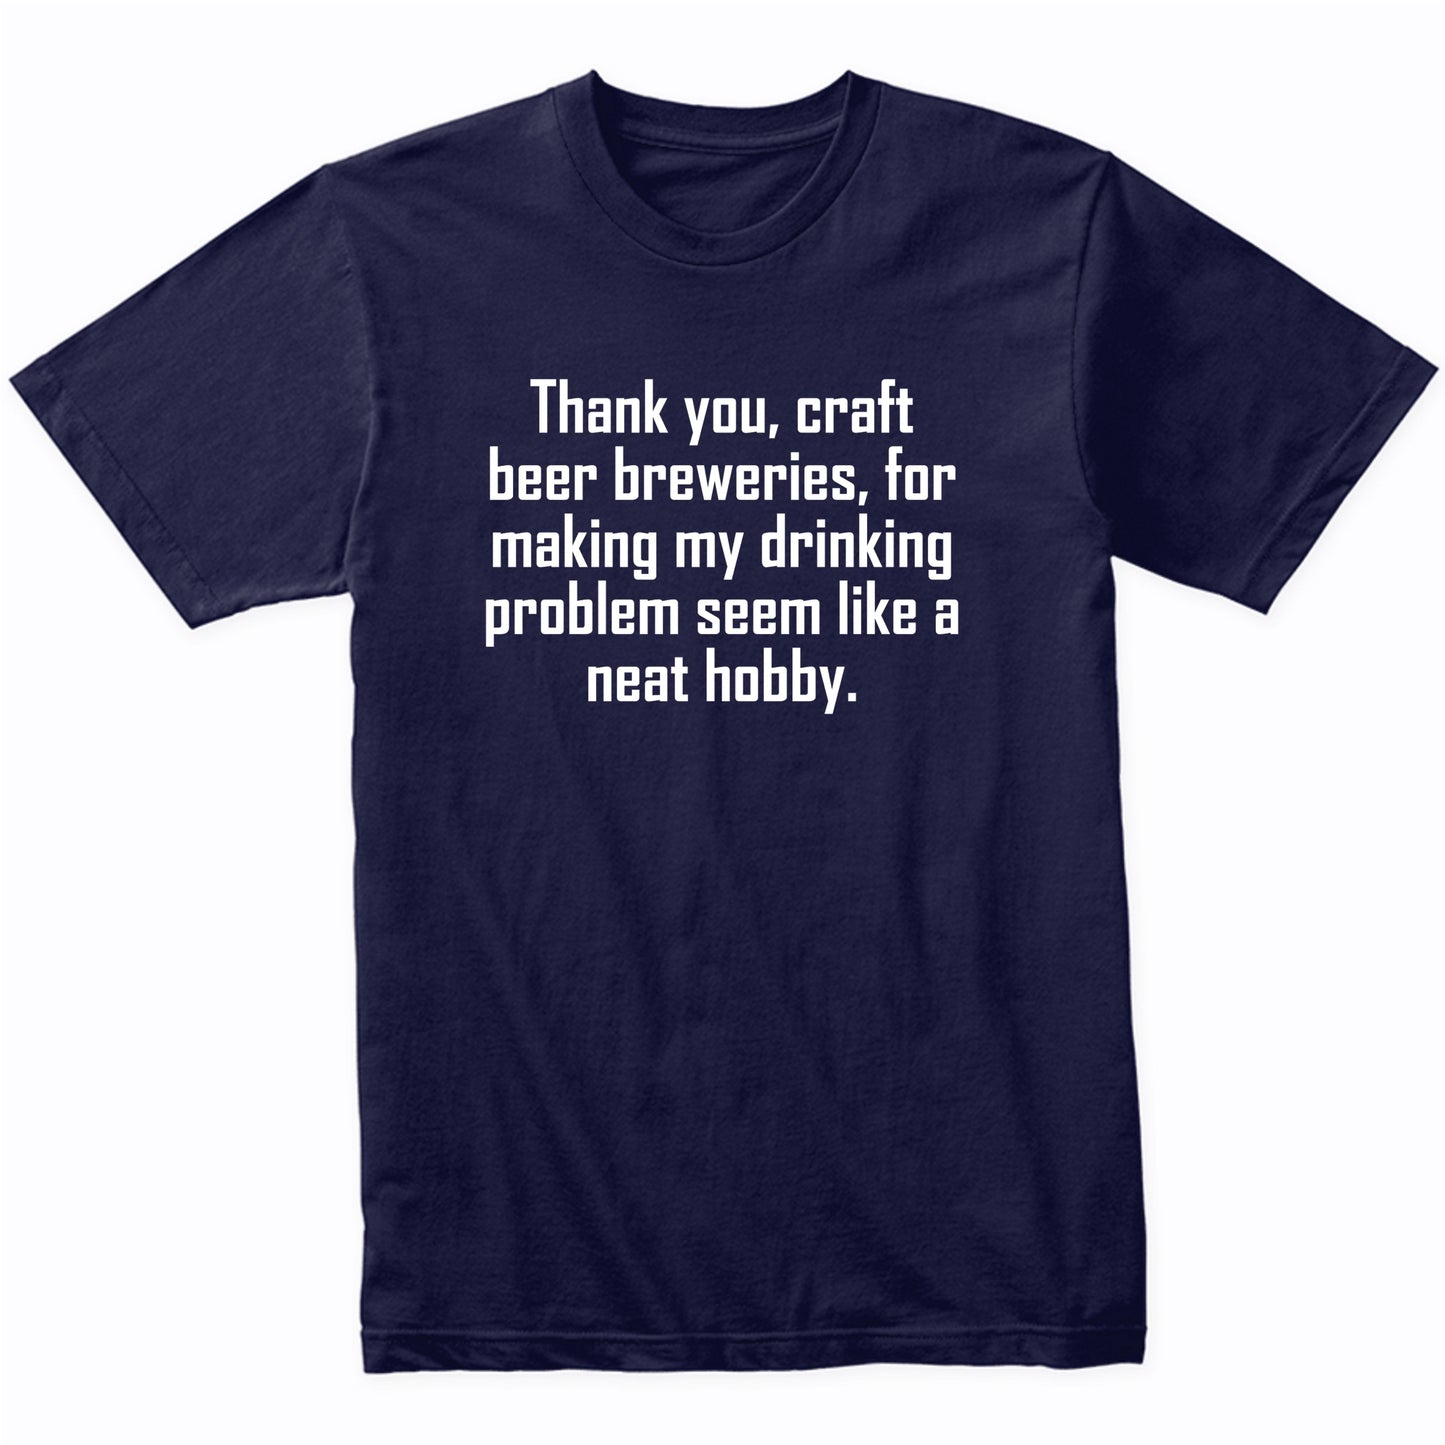 Funny Craft Beer Brewery Shirt For Craft Beer Lovers